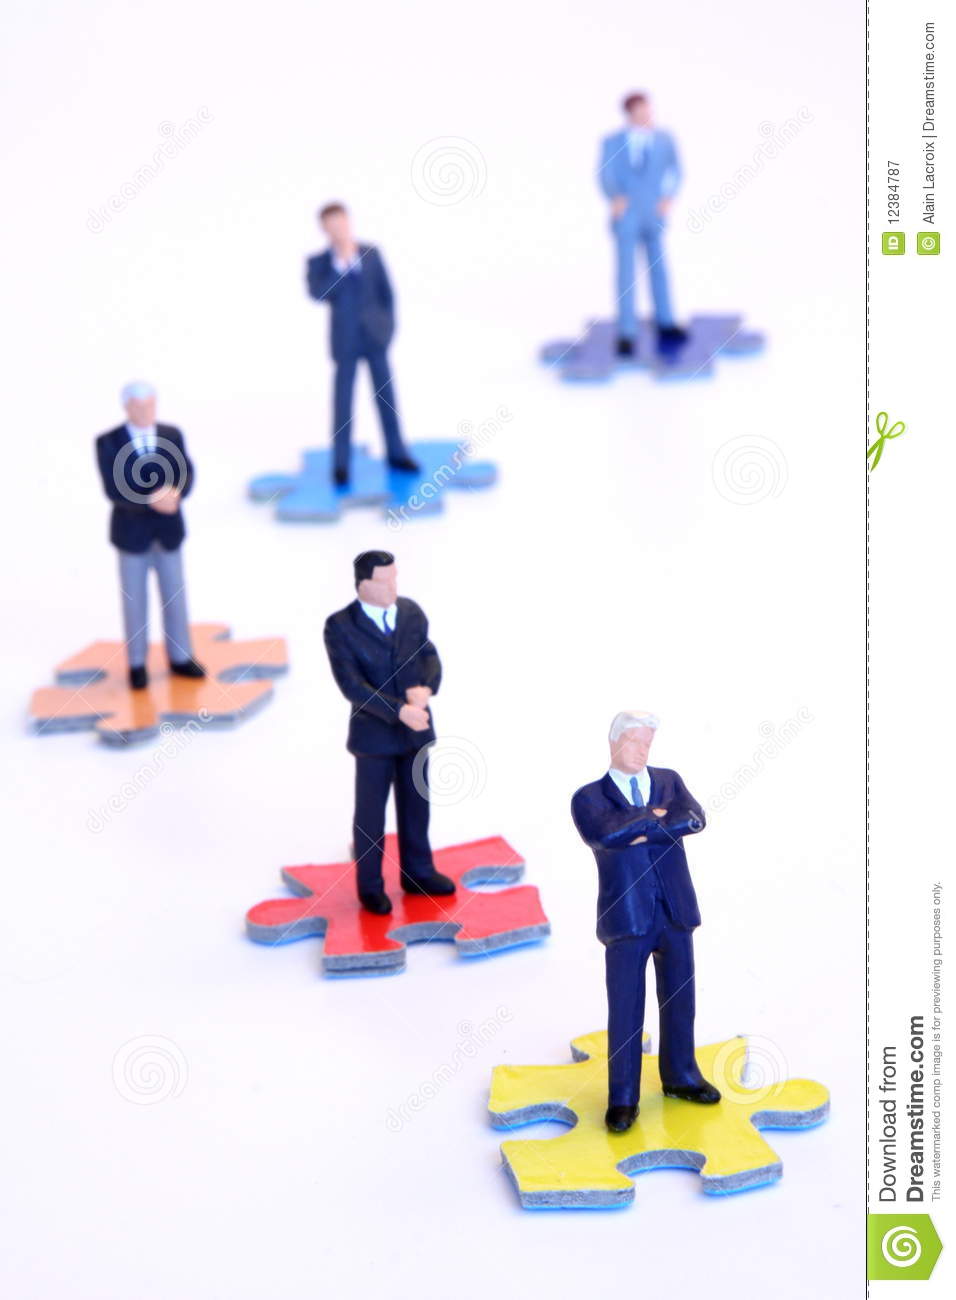 Chain Of Command Royalty Free Stock Photography   Image  12384787